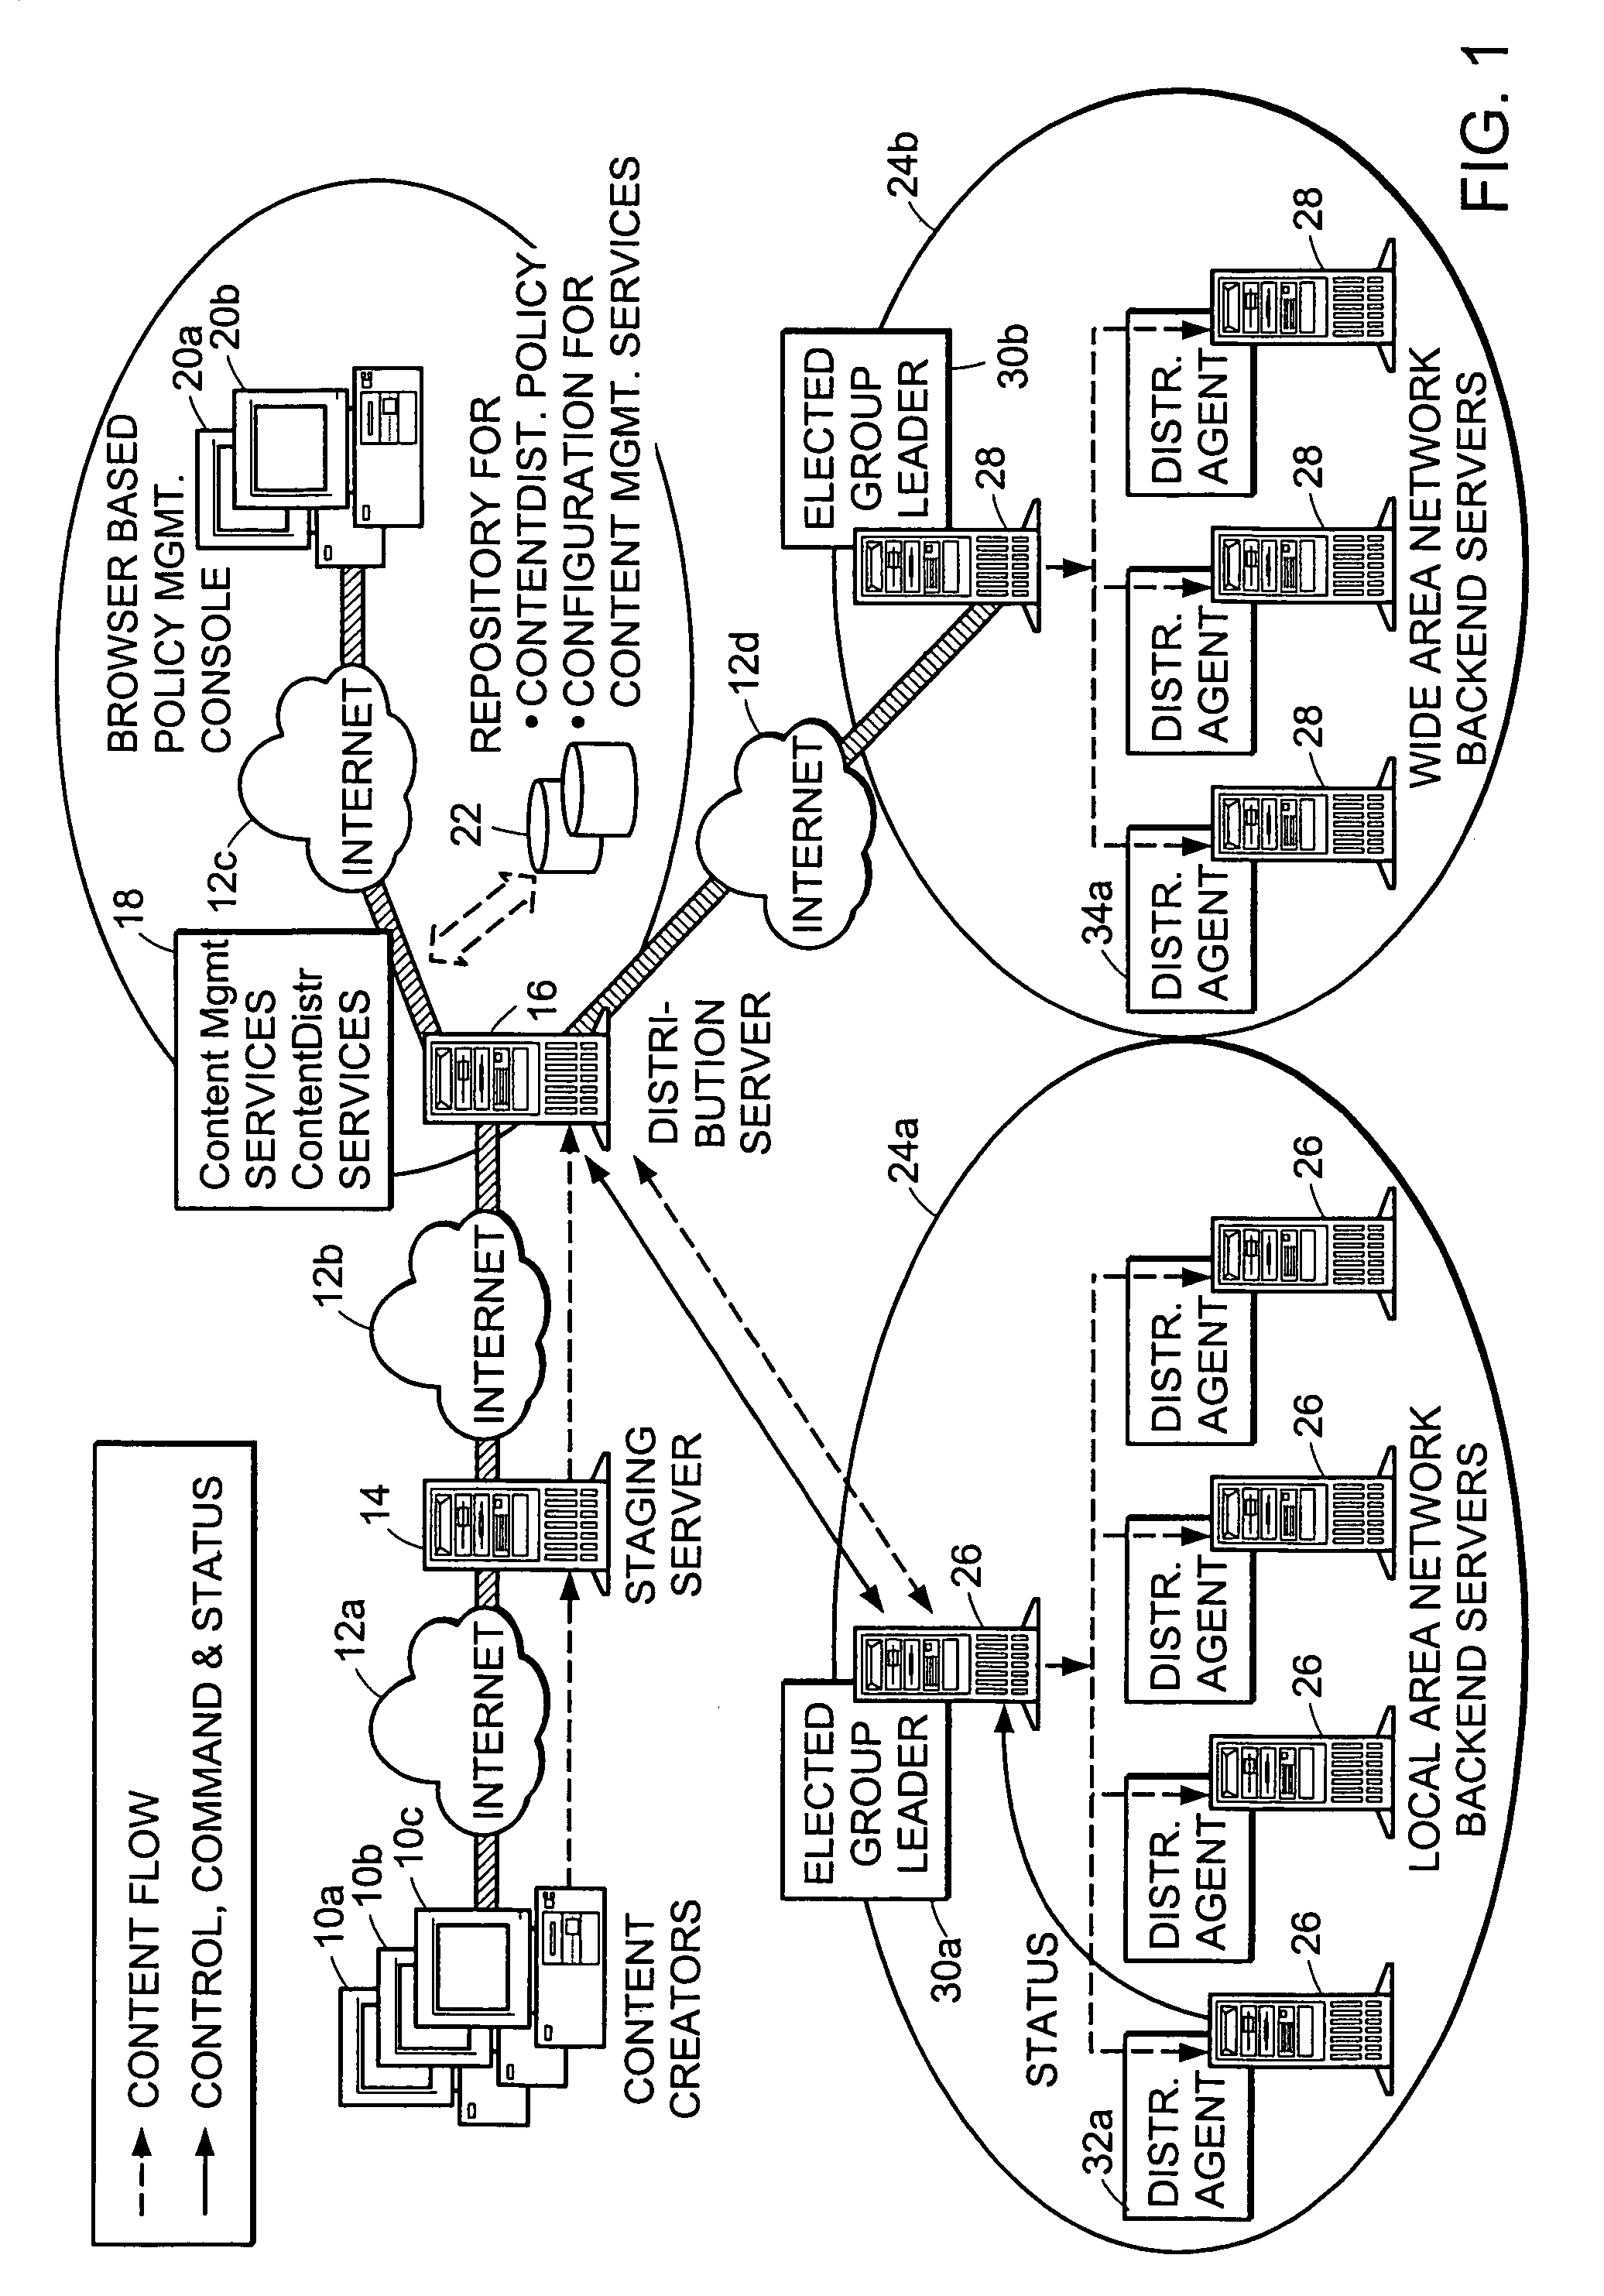 Method and apparatus for election of group leaders in a distributed network